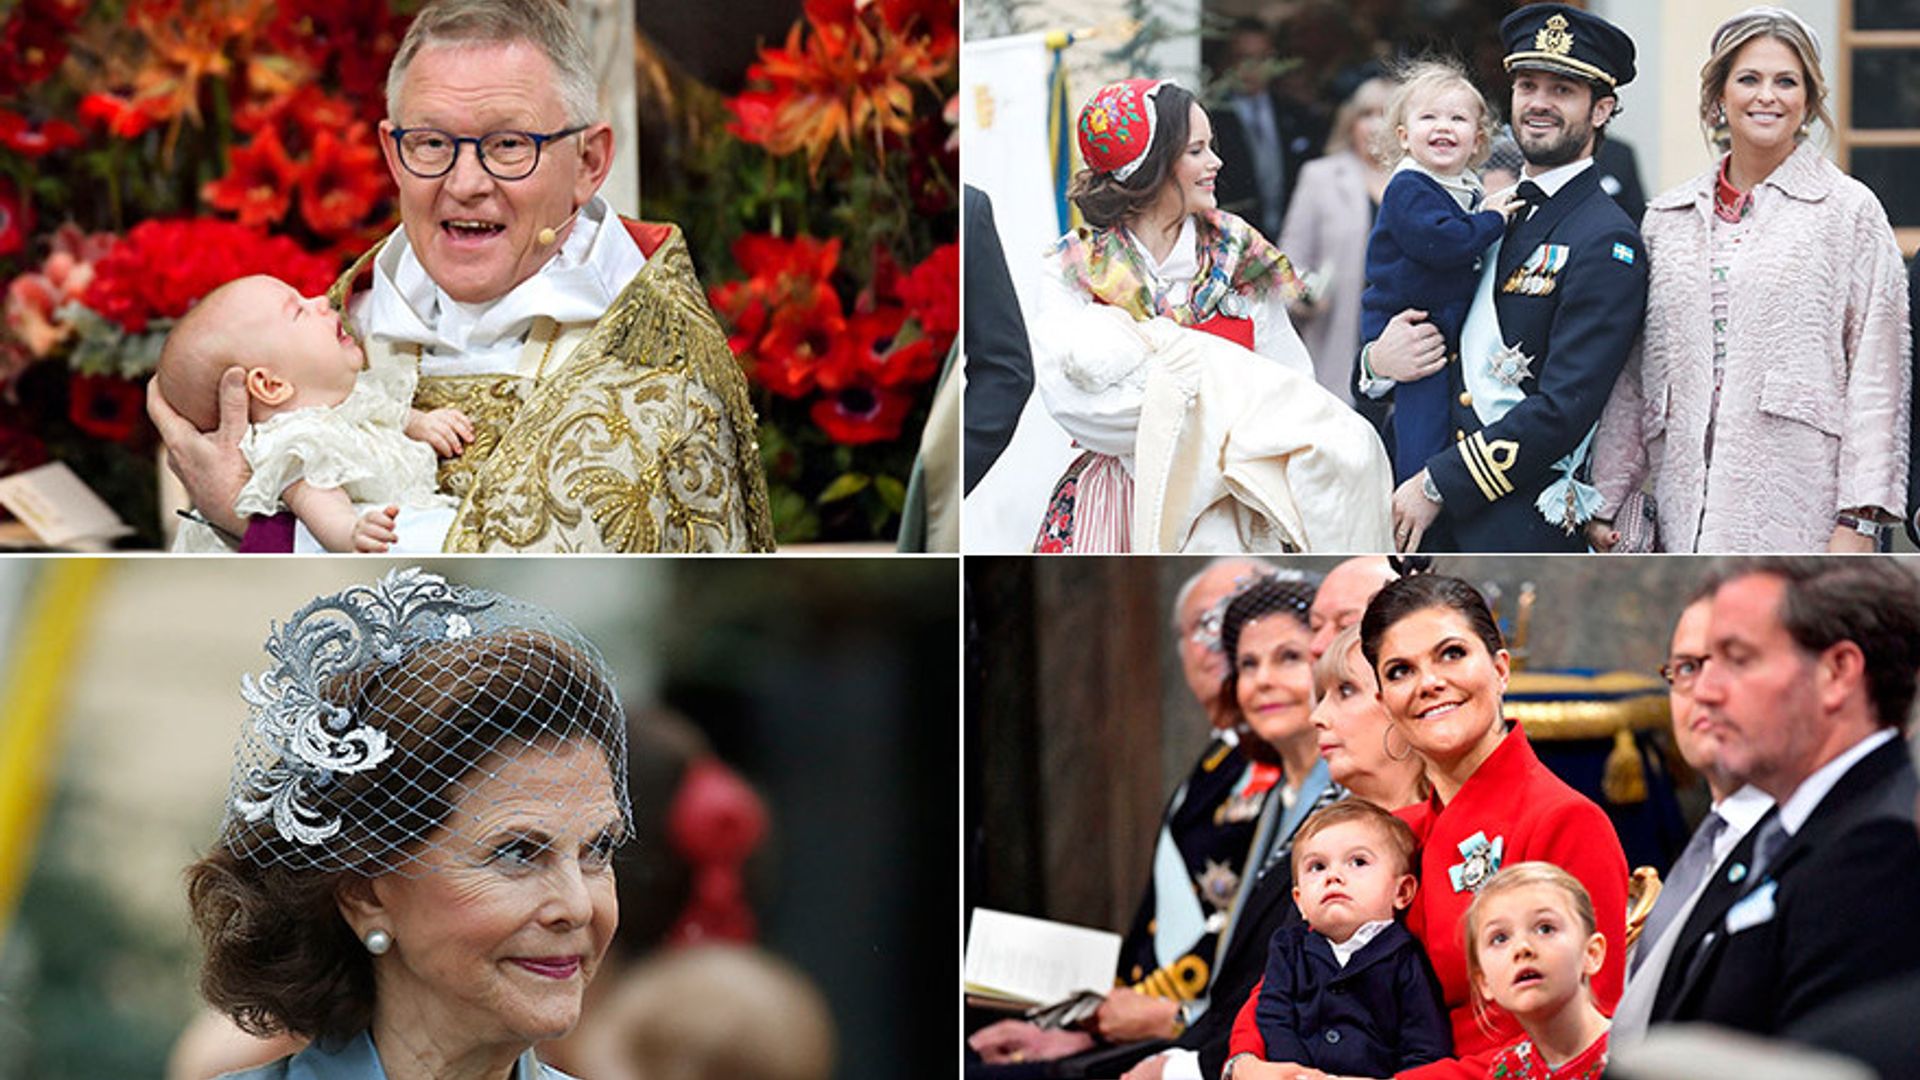 Prince Gabriel of Sweden christening: All the best photos